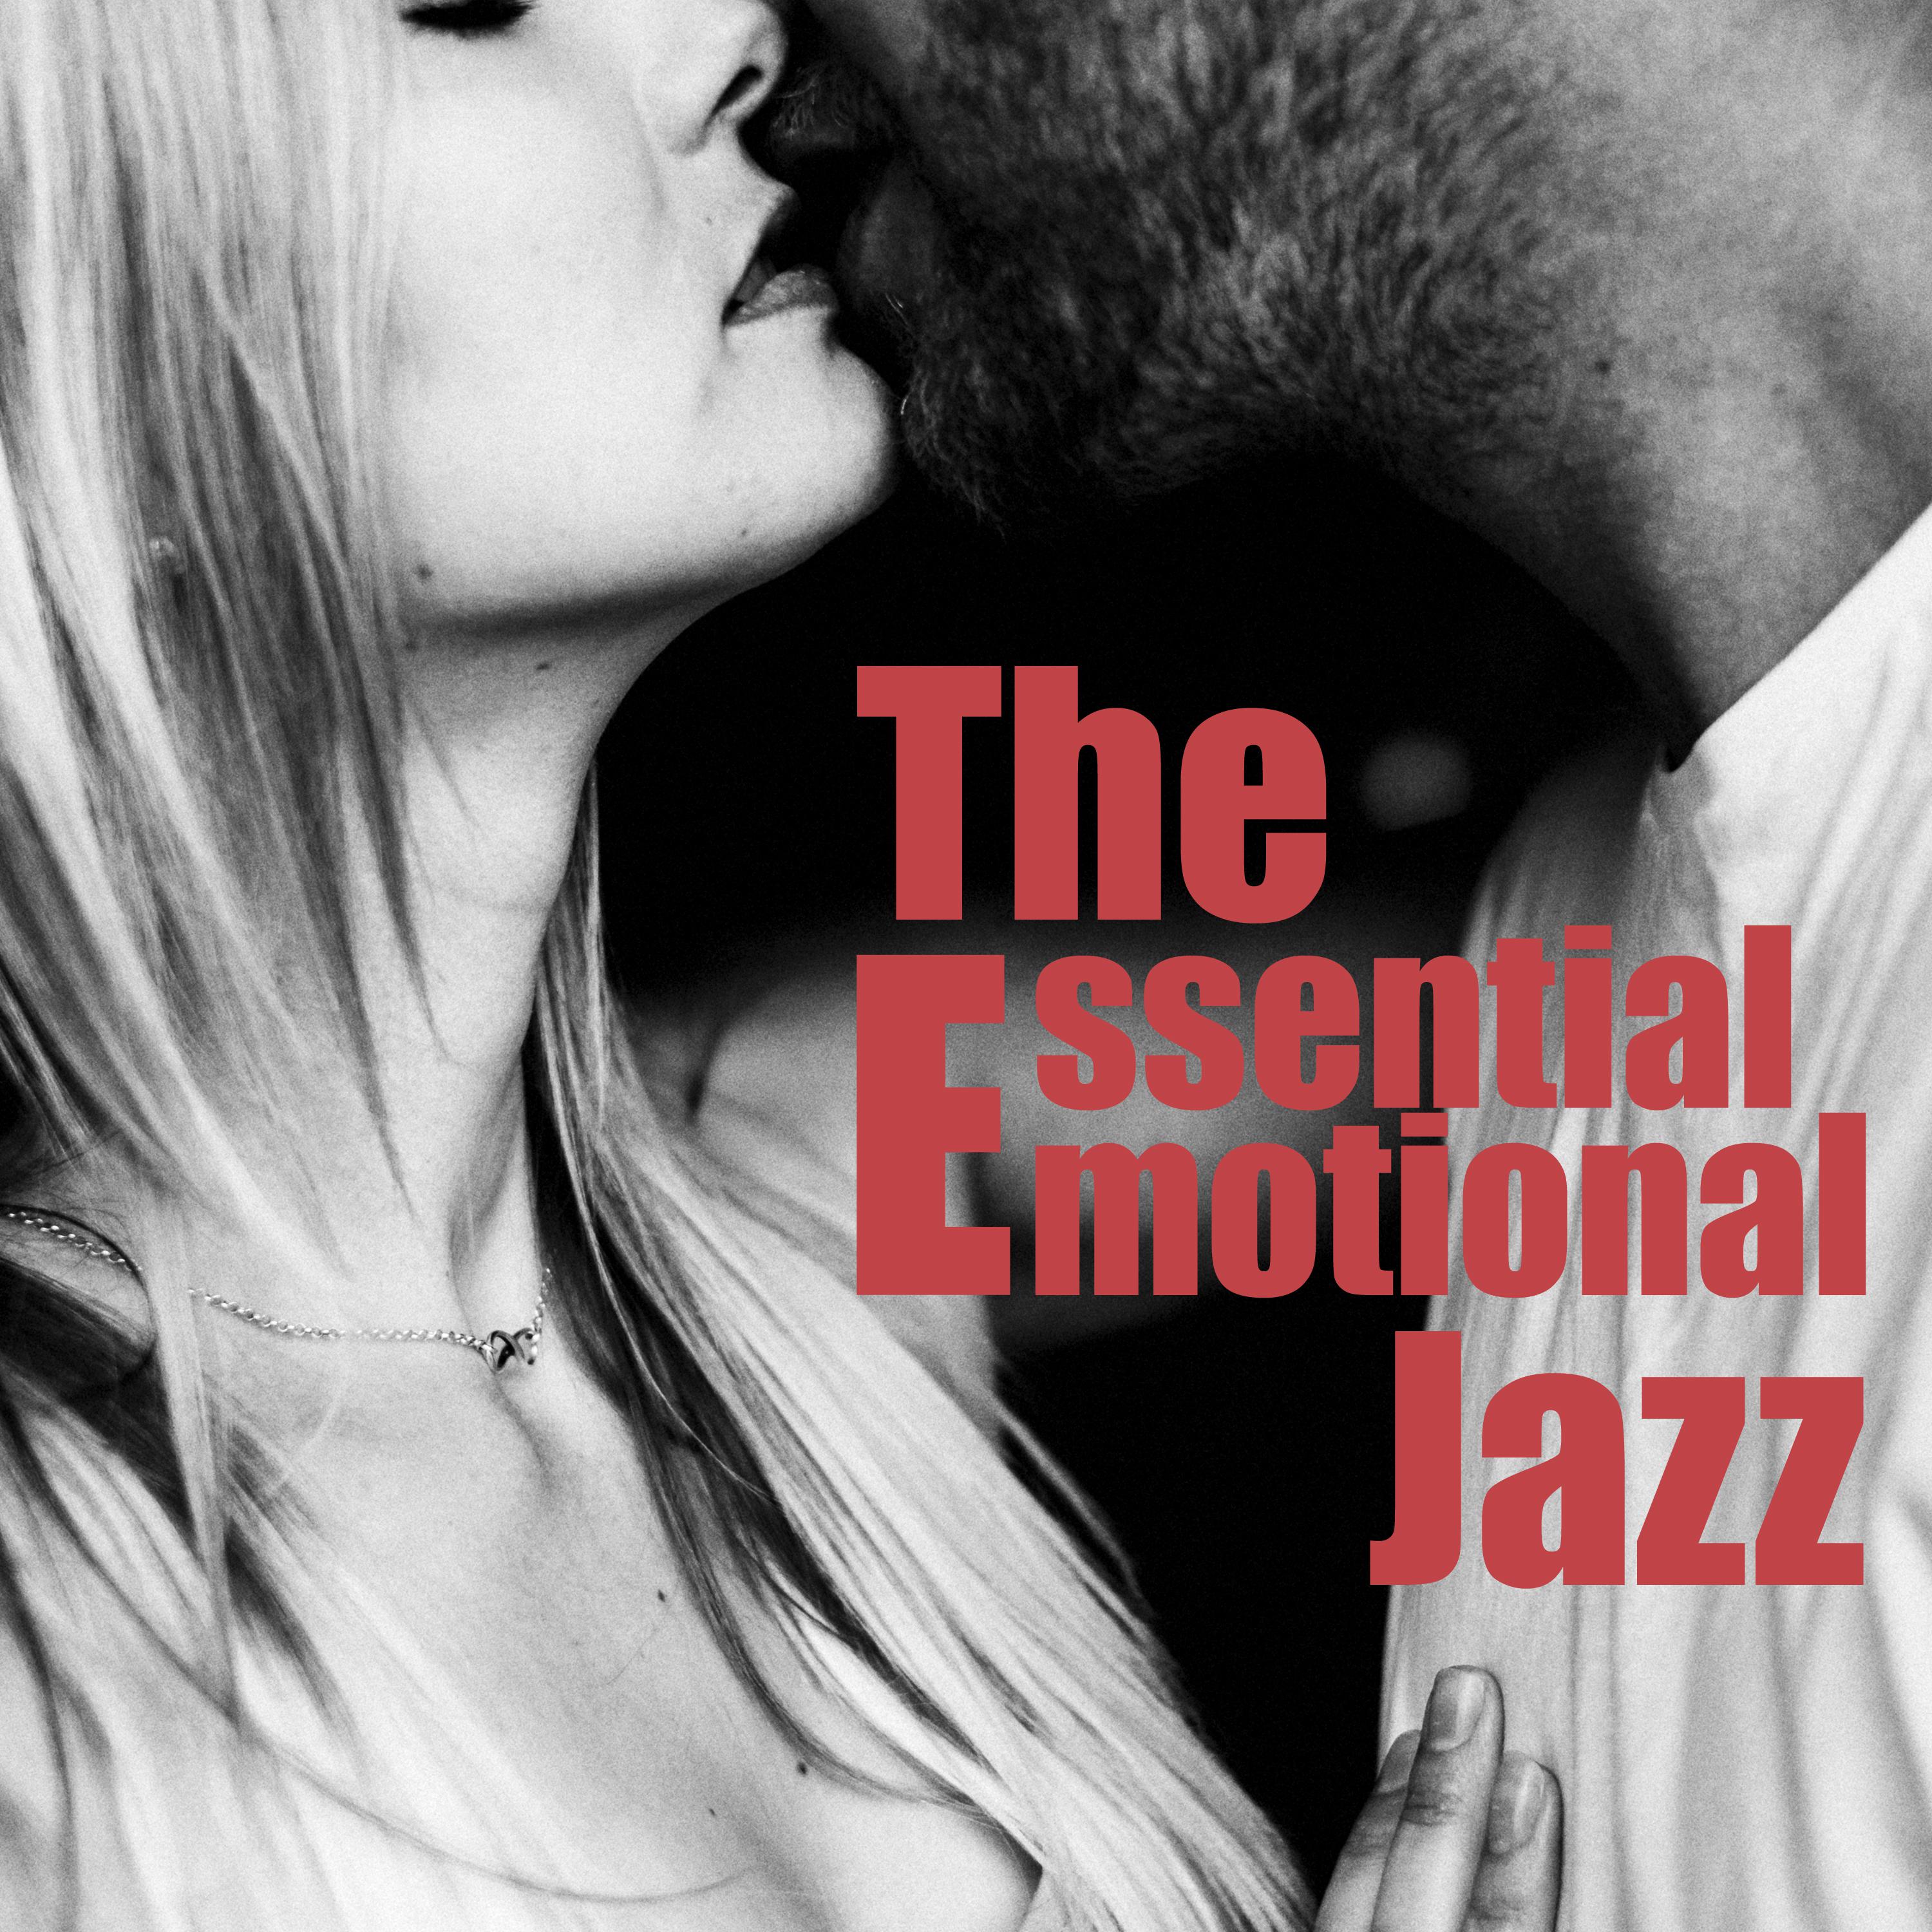 The Essential Emotional Jazz (Moody Sensual Jazz for Lovers, Perfect Background Music for Tantric Sex)